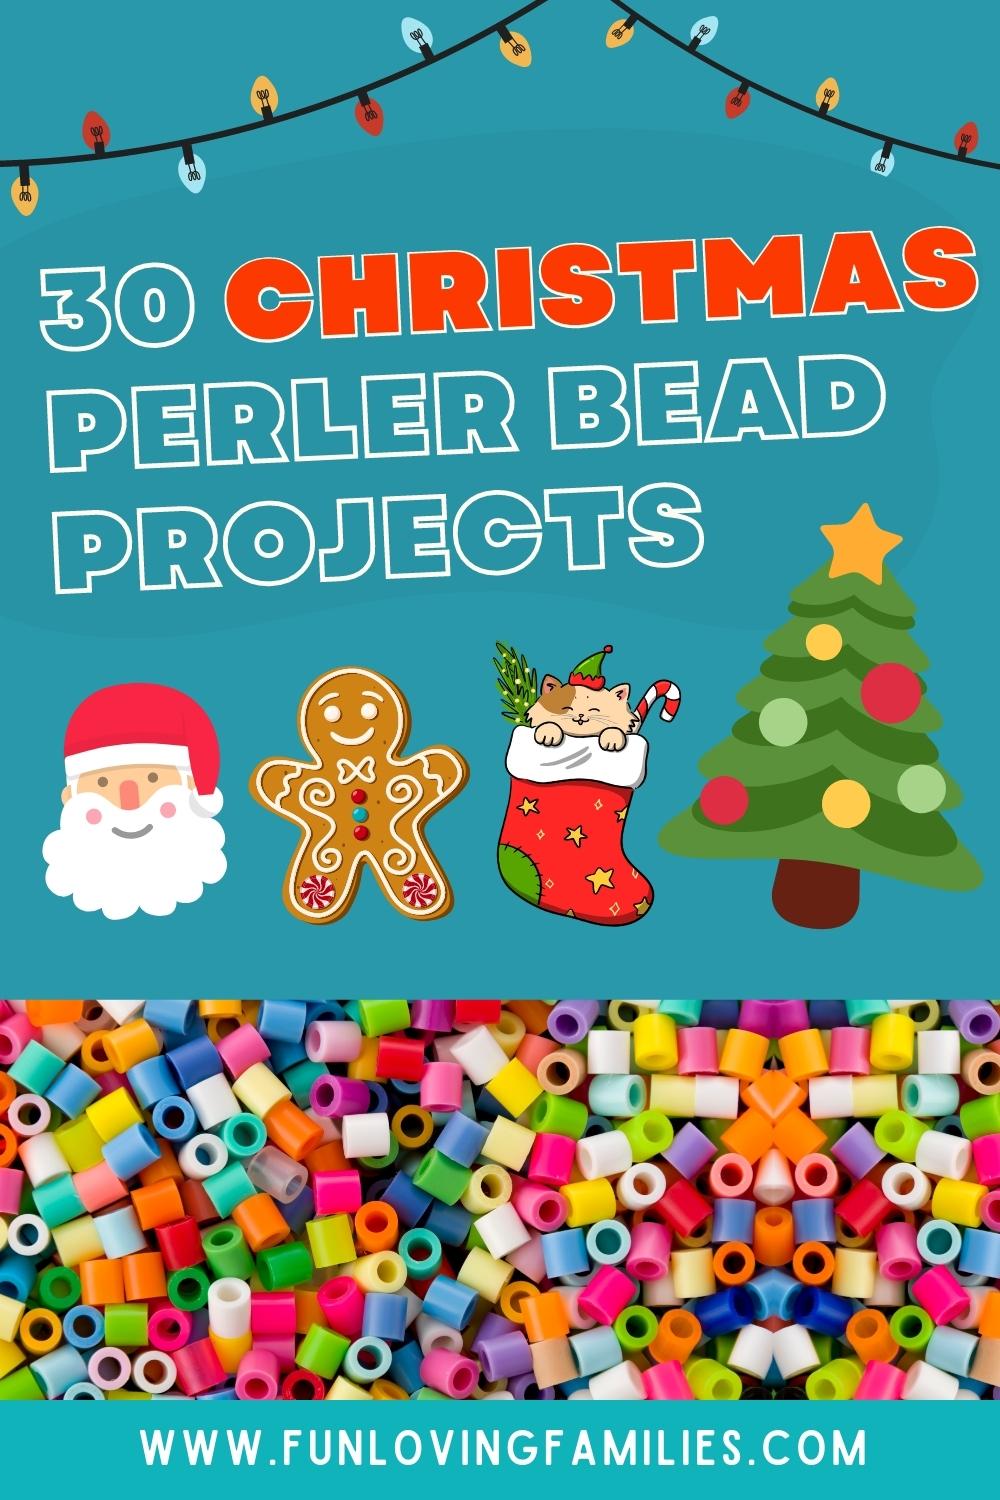 30 Christmas Perler Bead Patterns, Designs and Ideas Pin image